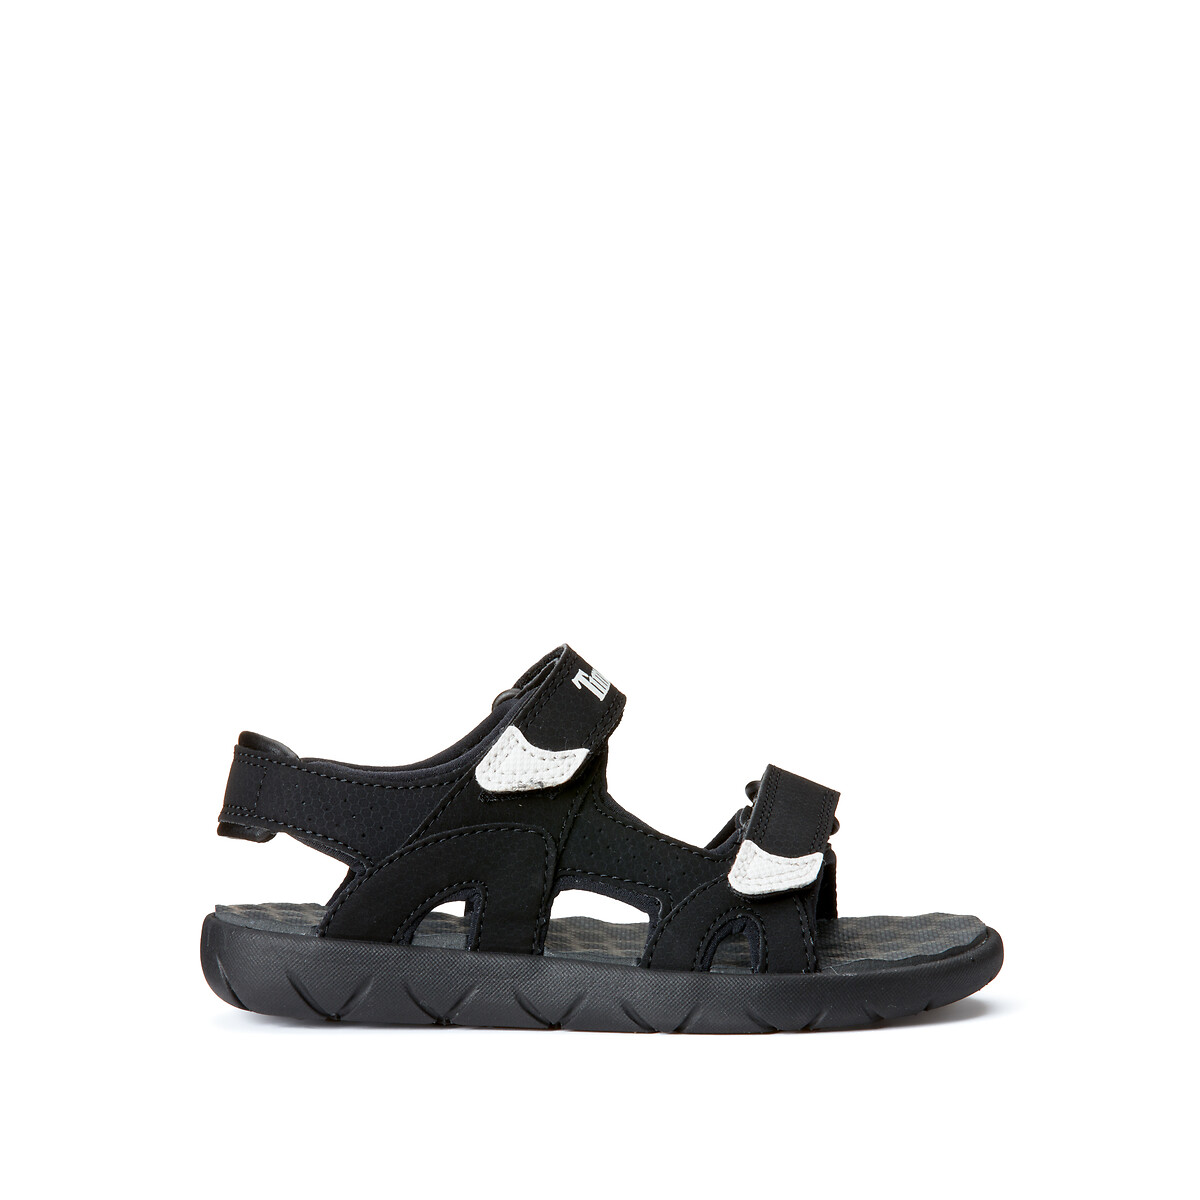 Image of Kids Perkins Row 2-Strap Sandals in Leather with Touch 'n' Close Fastening